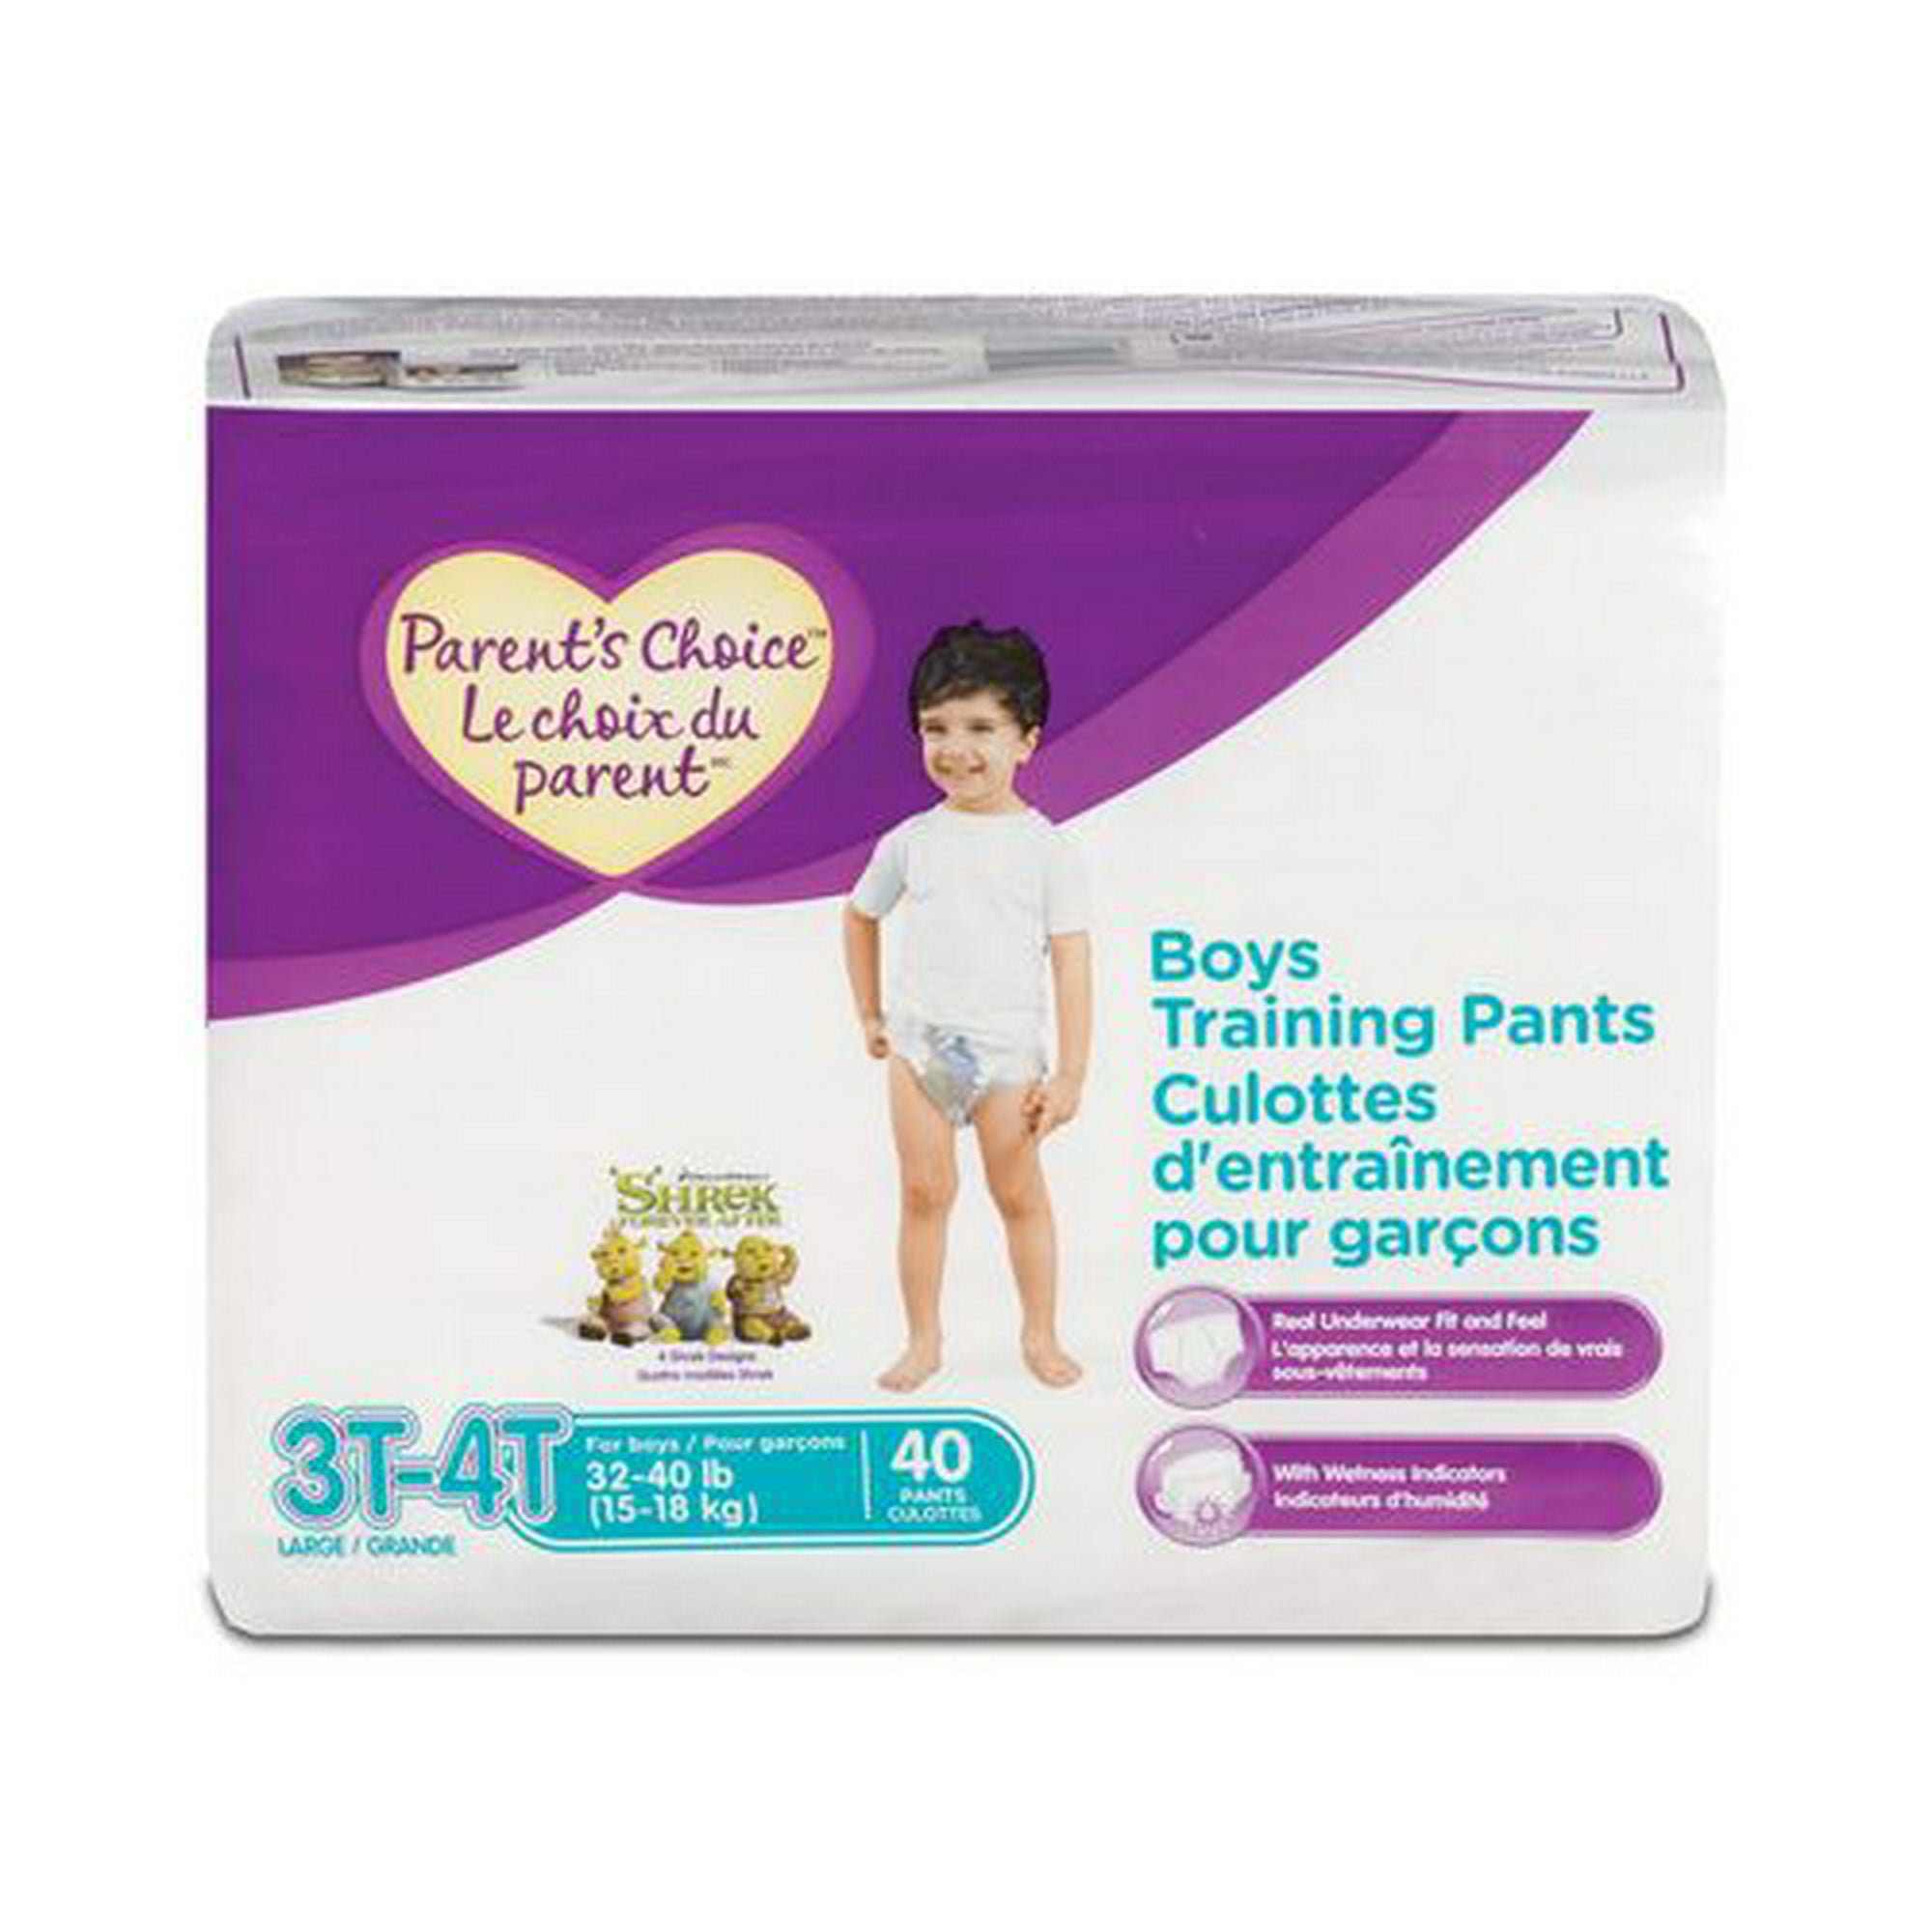 Unboxing and Review of Parents Choice Boys Training Pants and